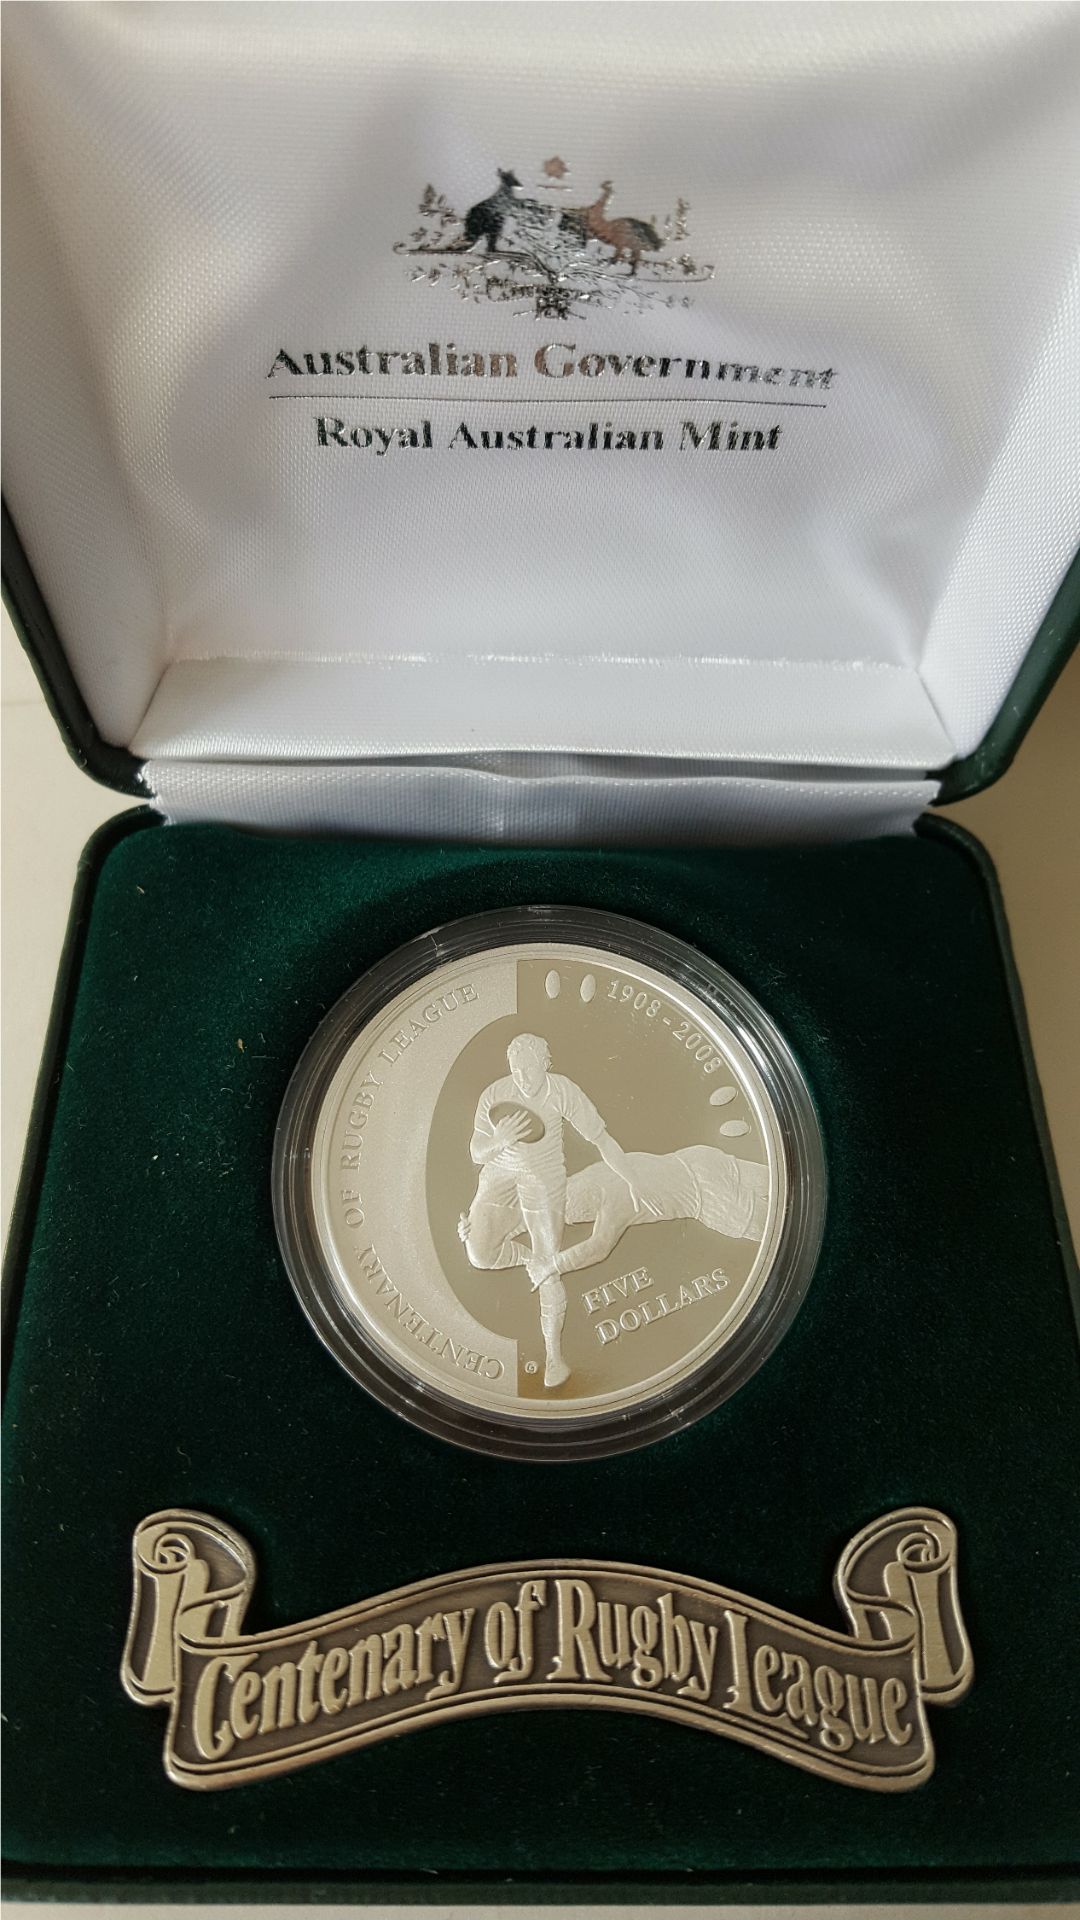 Collectable Coin Australian Royal Mint 2008 Centenary of Rugby League $5 Silver Proof - Image 2 of 5